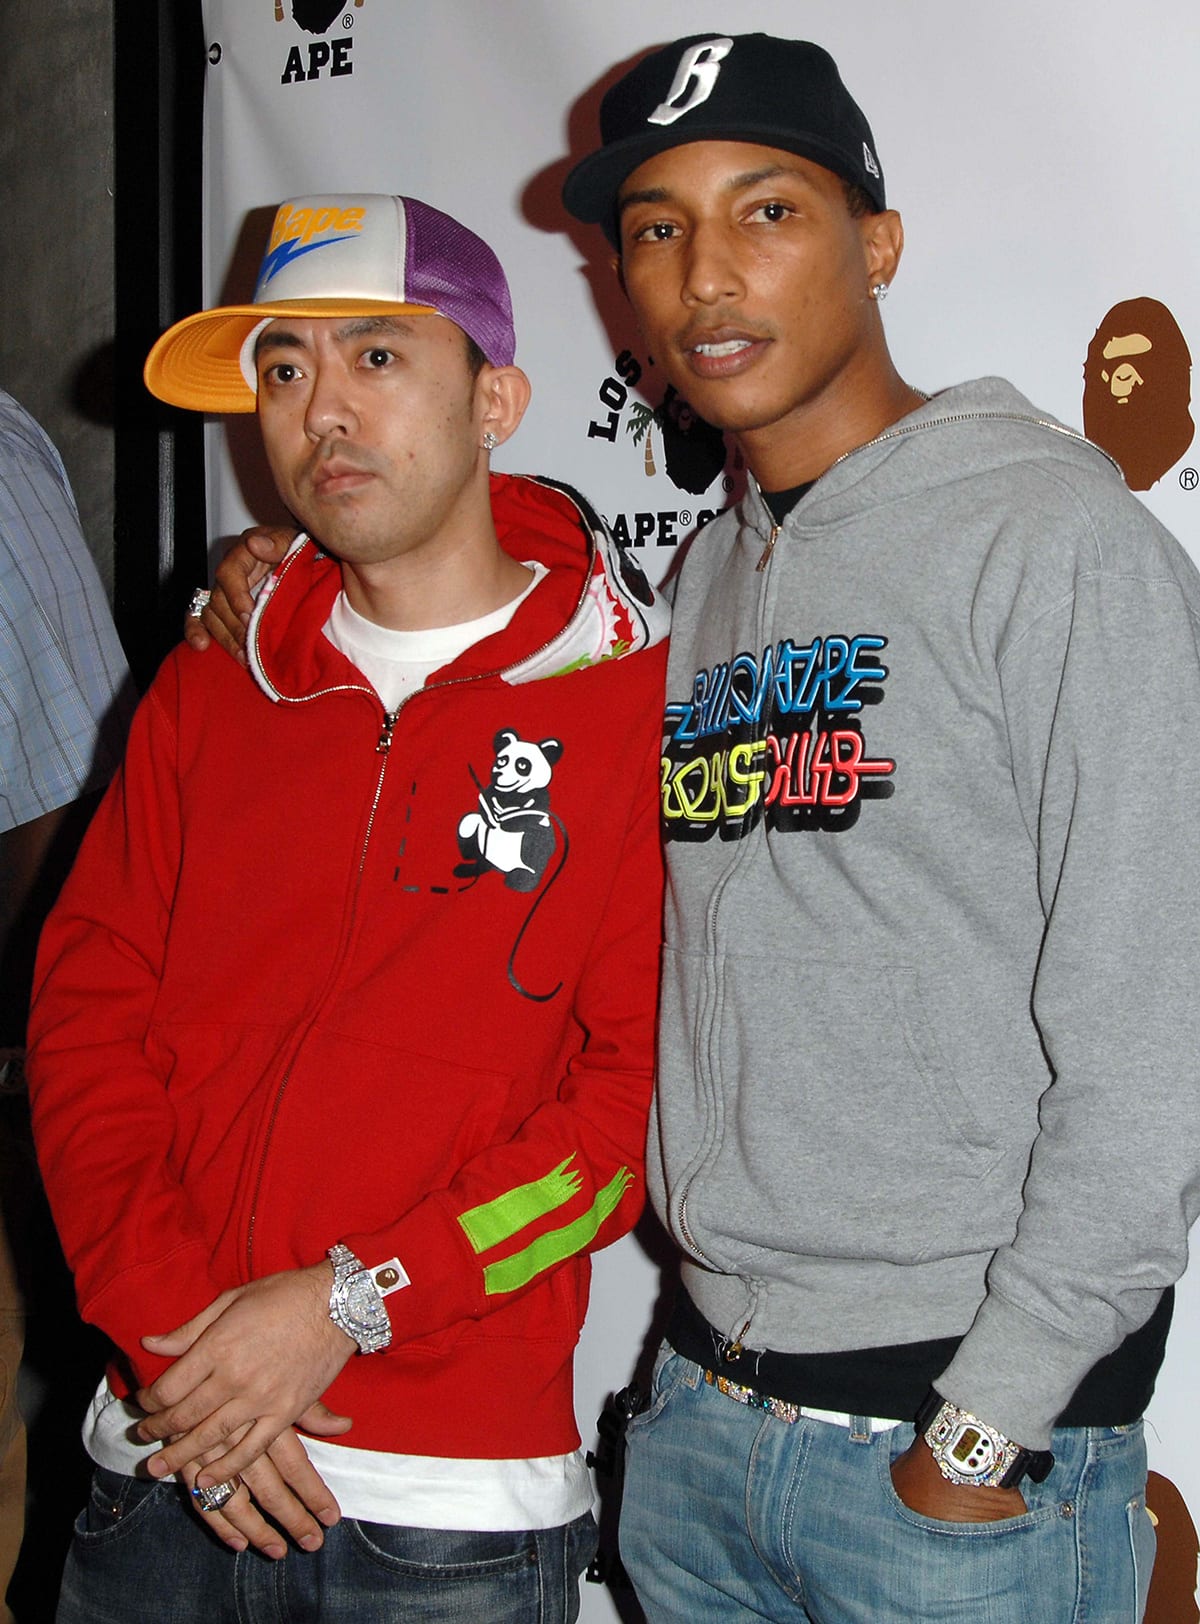 BAPE founder and now Kenzo creative director Nigo with Pharrell Williams at the Los Angeles BAPE store opening in 2008